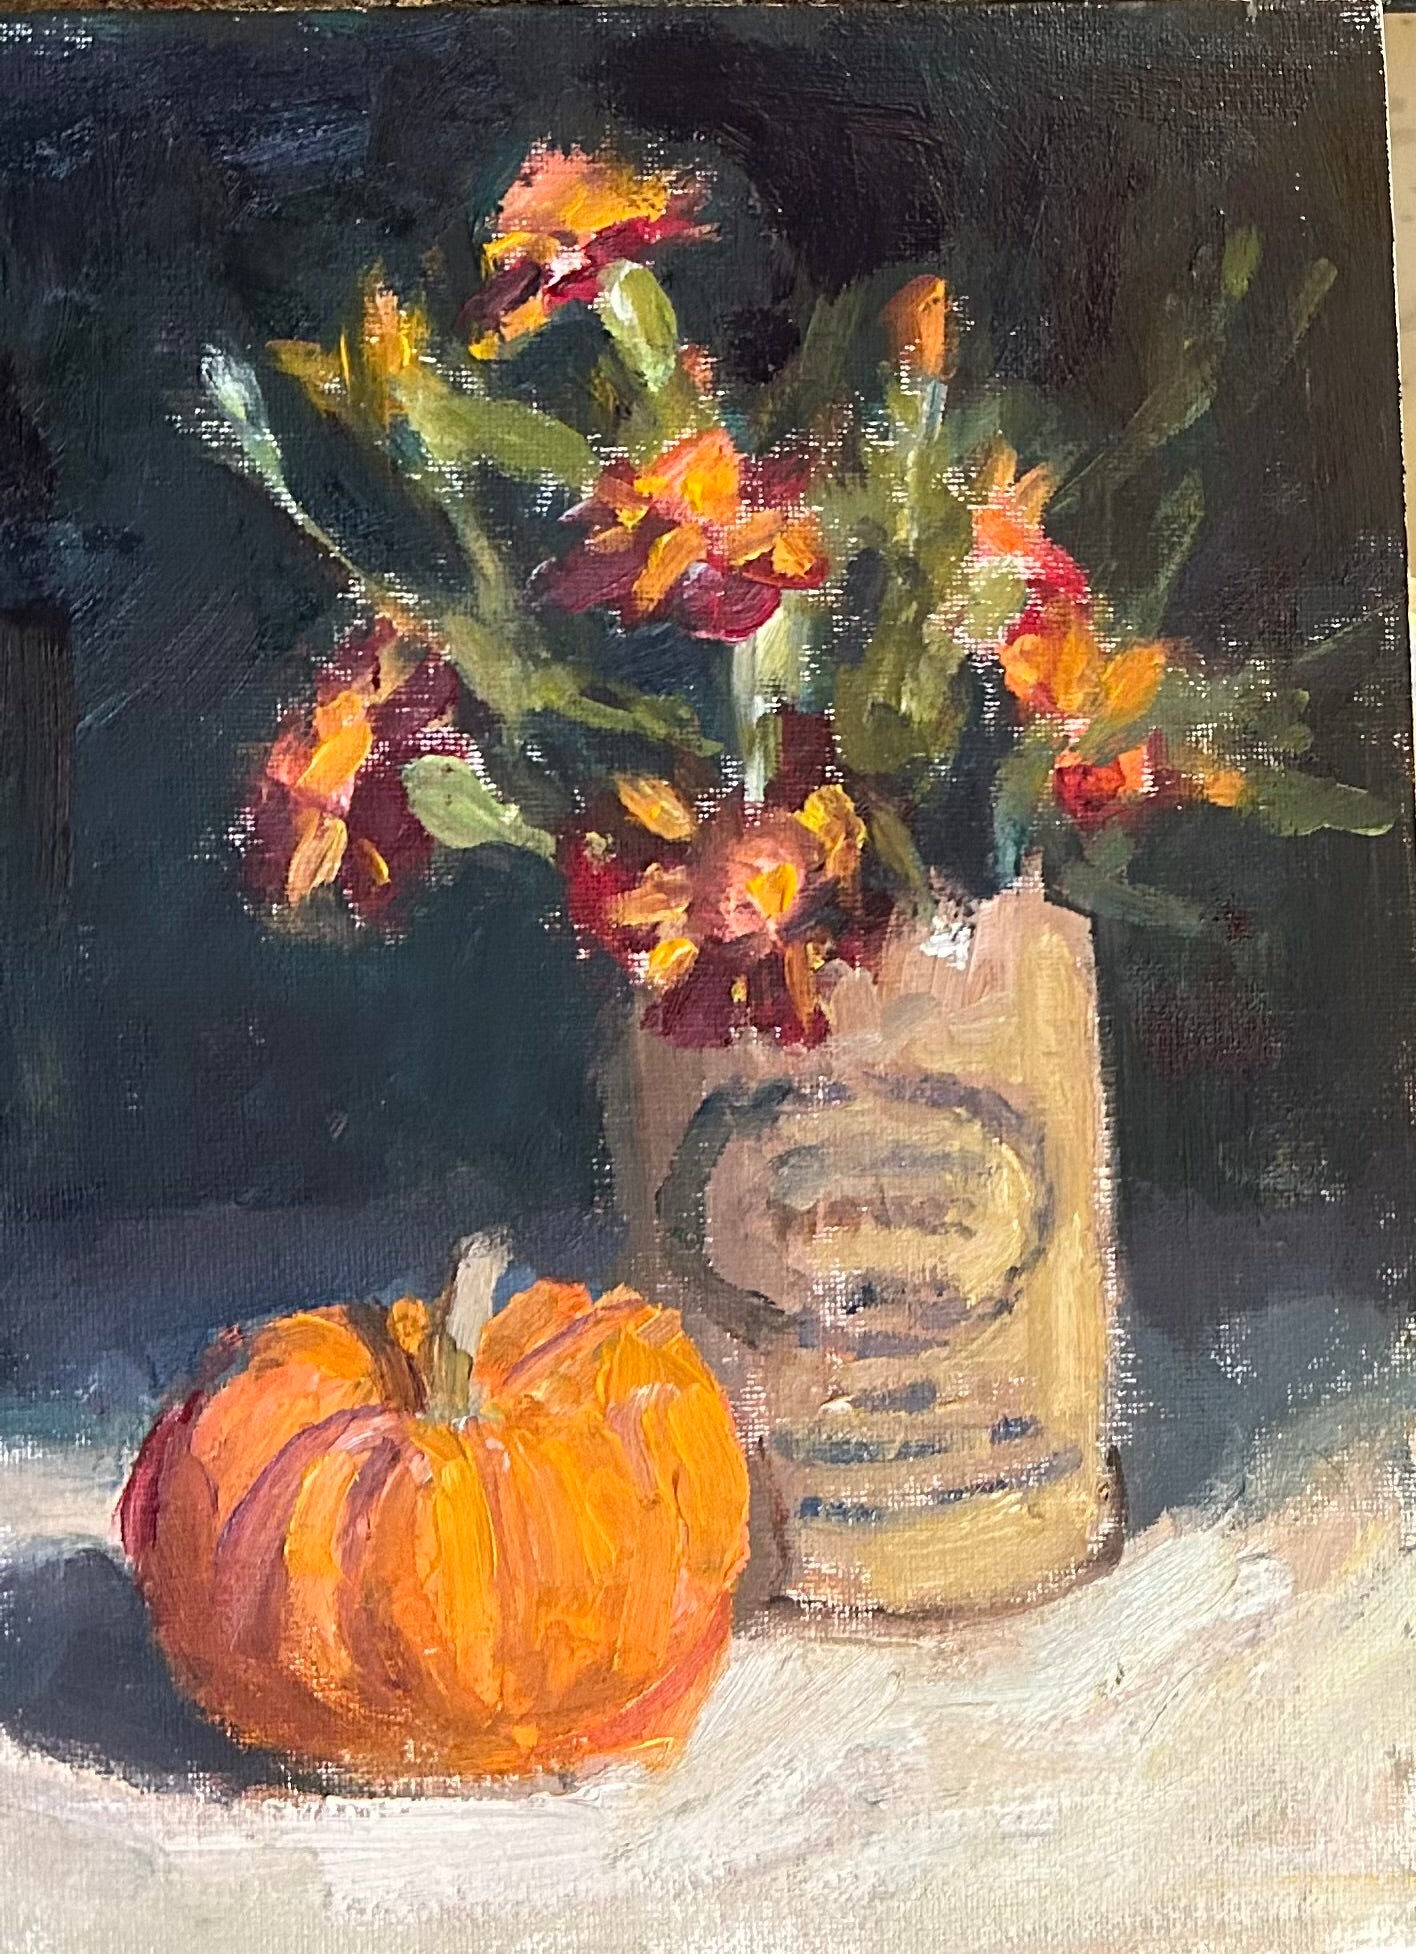 Marigolds and Marmalade (12x 9 Inches)